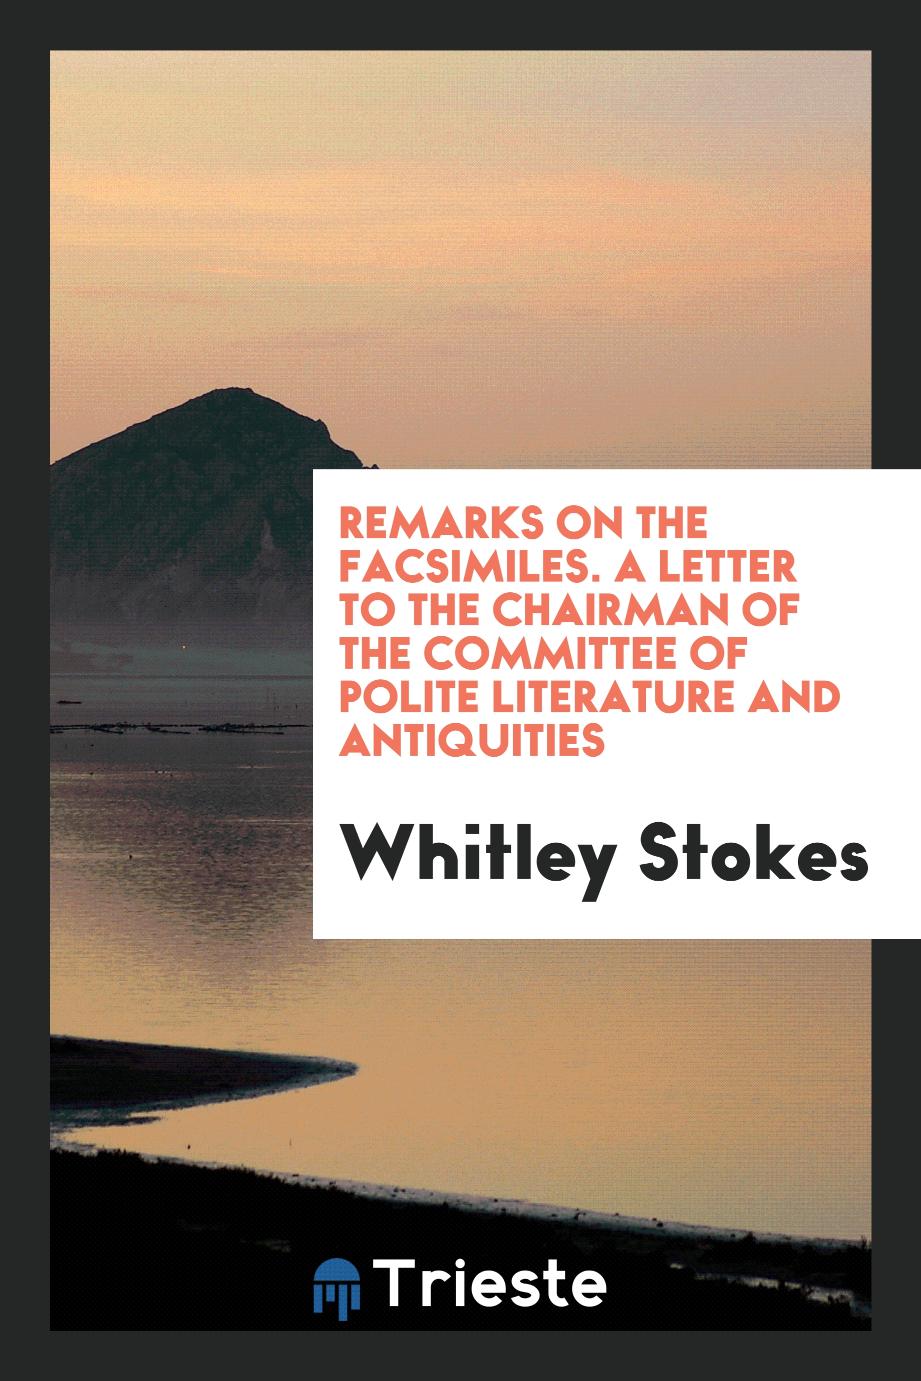 Remarks on the facsimiles. A letter to the chairman of the committee of polite literature and antiquities